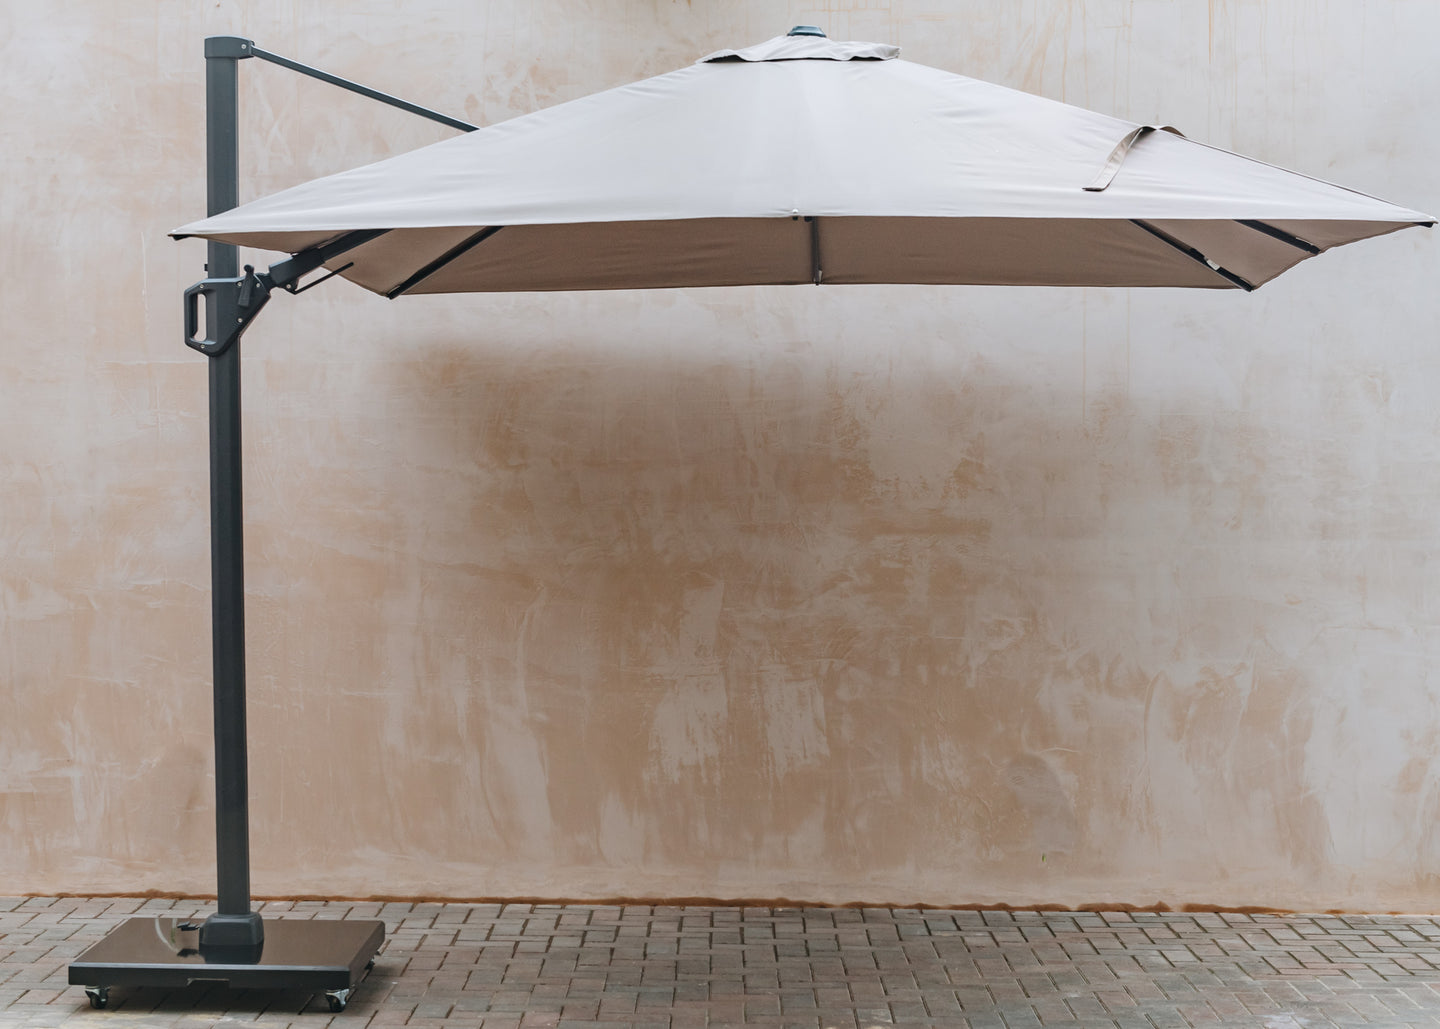 T2 Challenger Square Free Arm Parasol in Taupe (3mx3m)